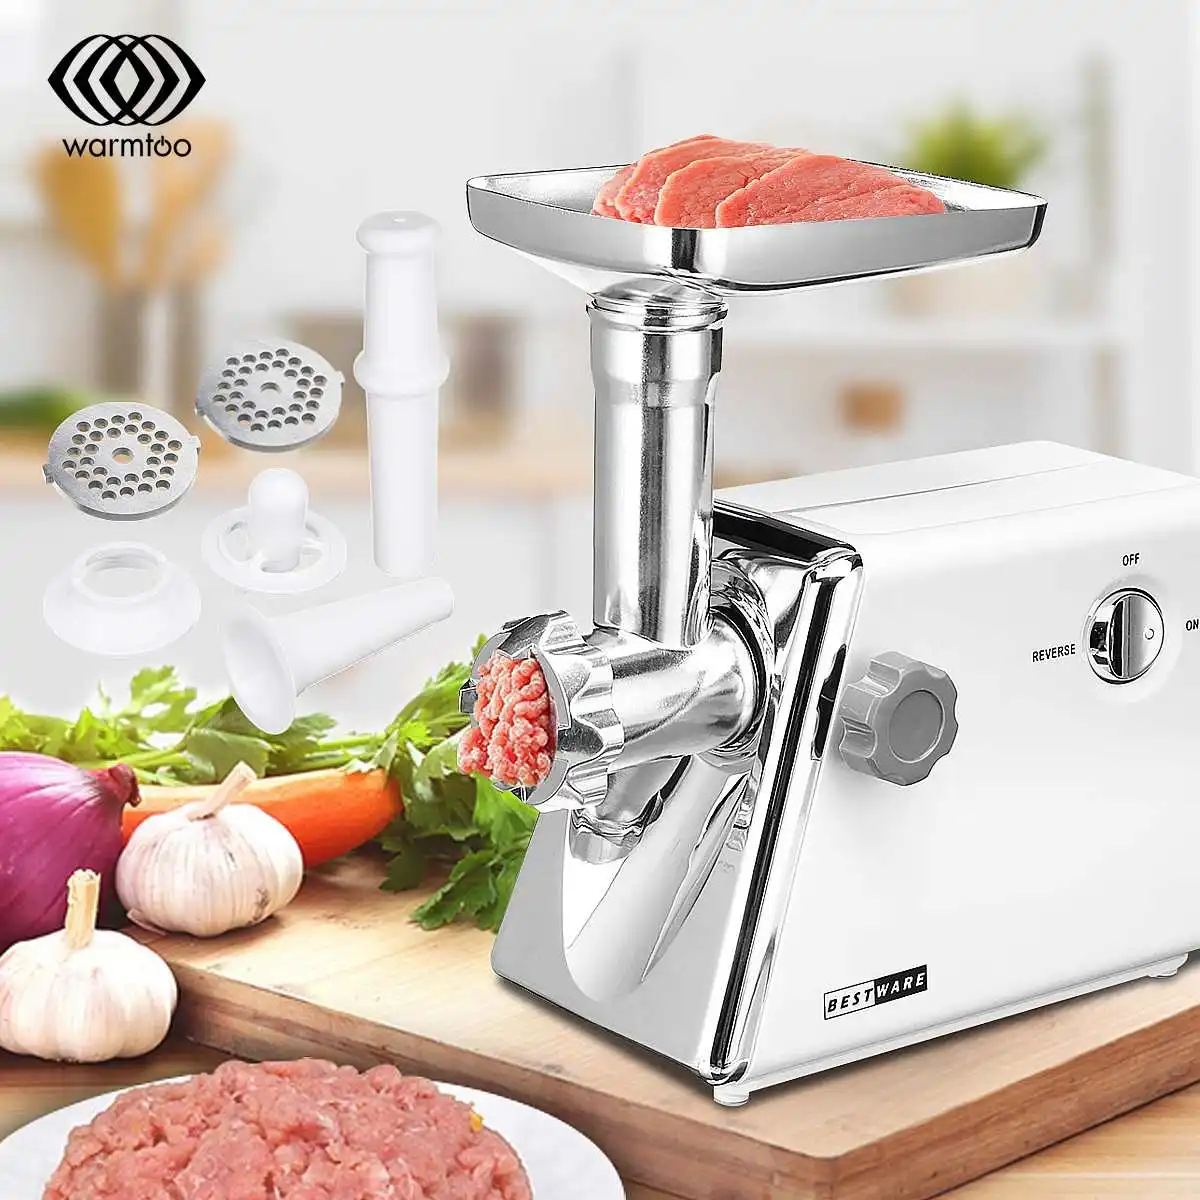 

220V 2800W Electric Meat Grinders Stainless Steel Duty Sausage Stuffer Food Processor Grinding Mincing Stirring Mixing Machine